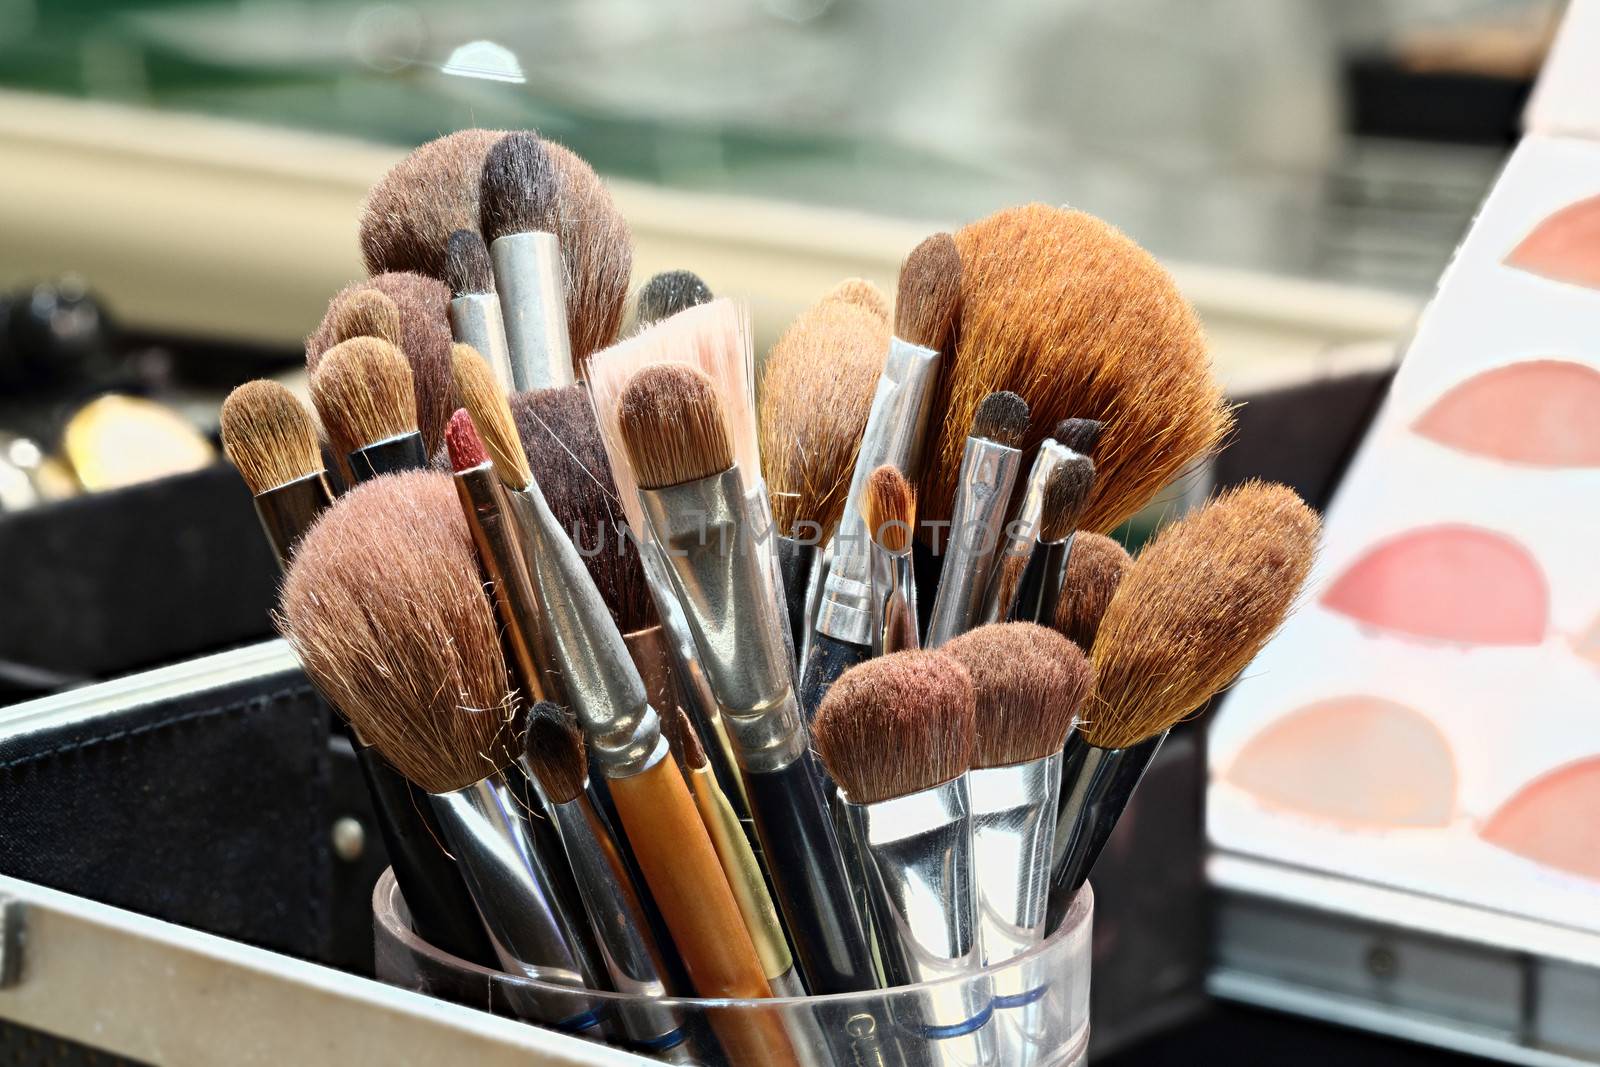 Group of Makeup artist brushes